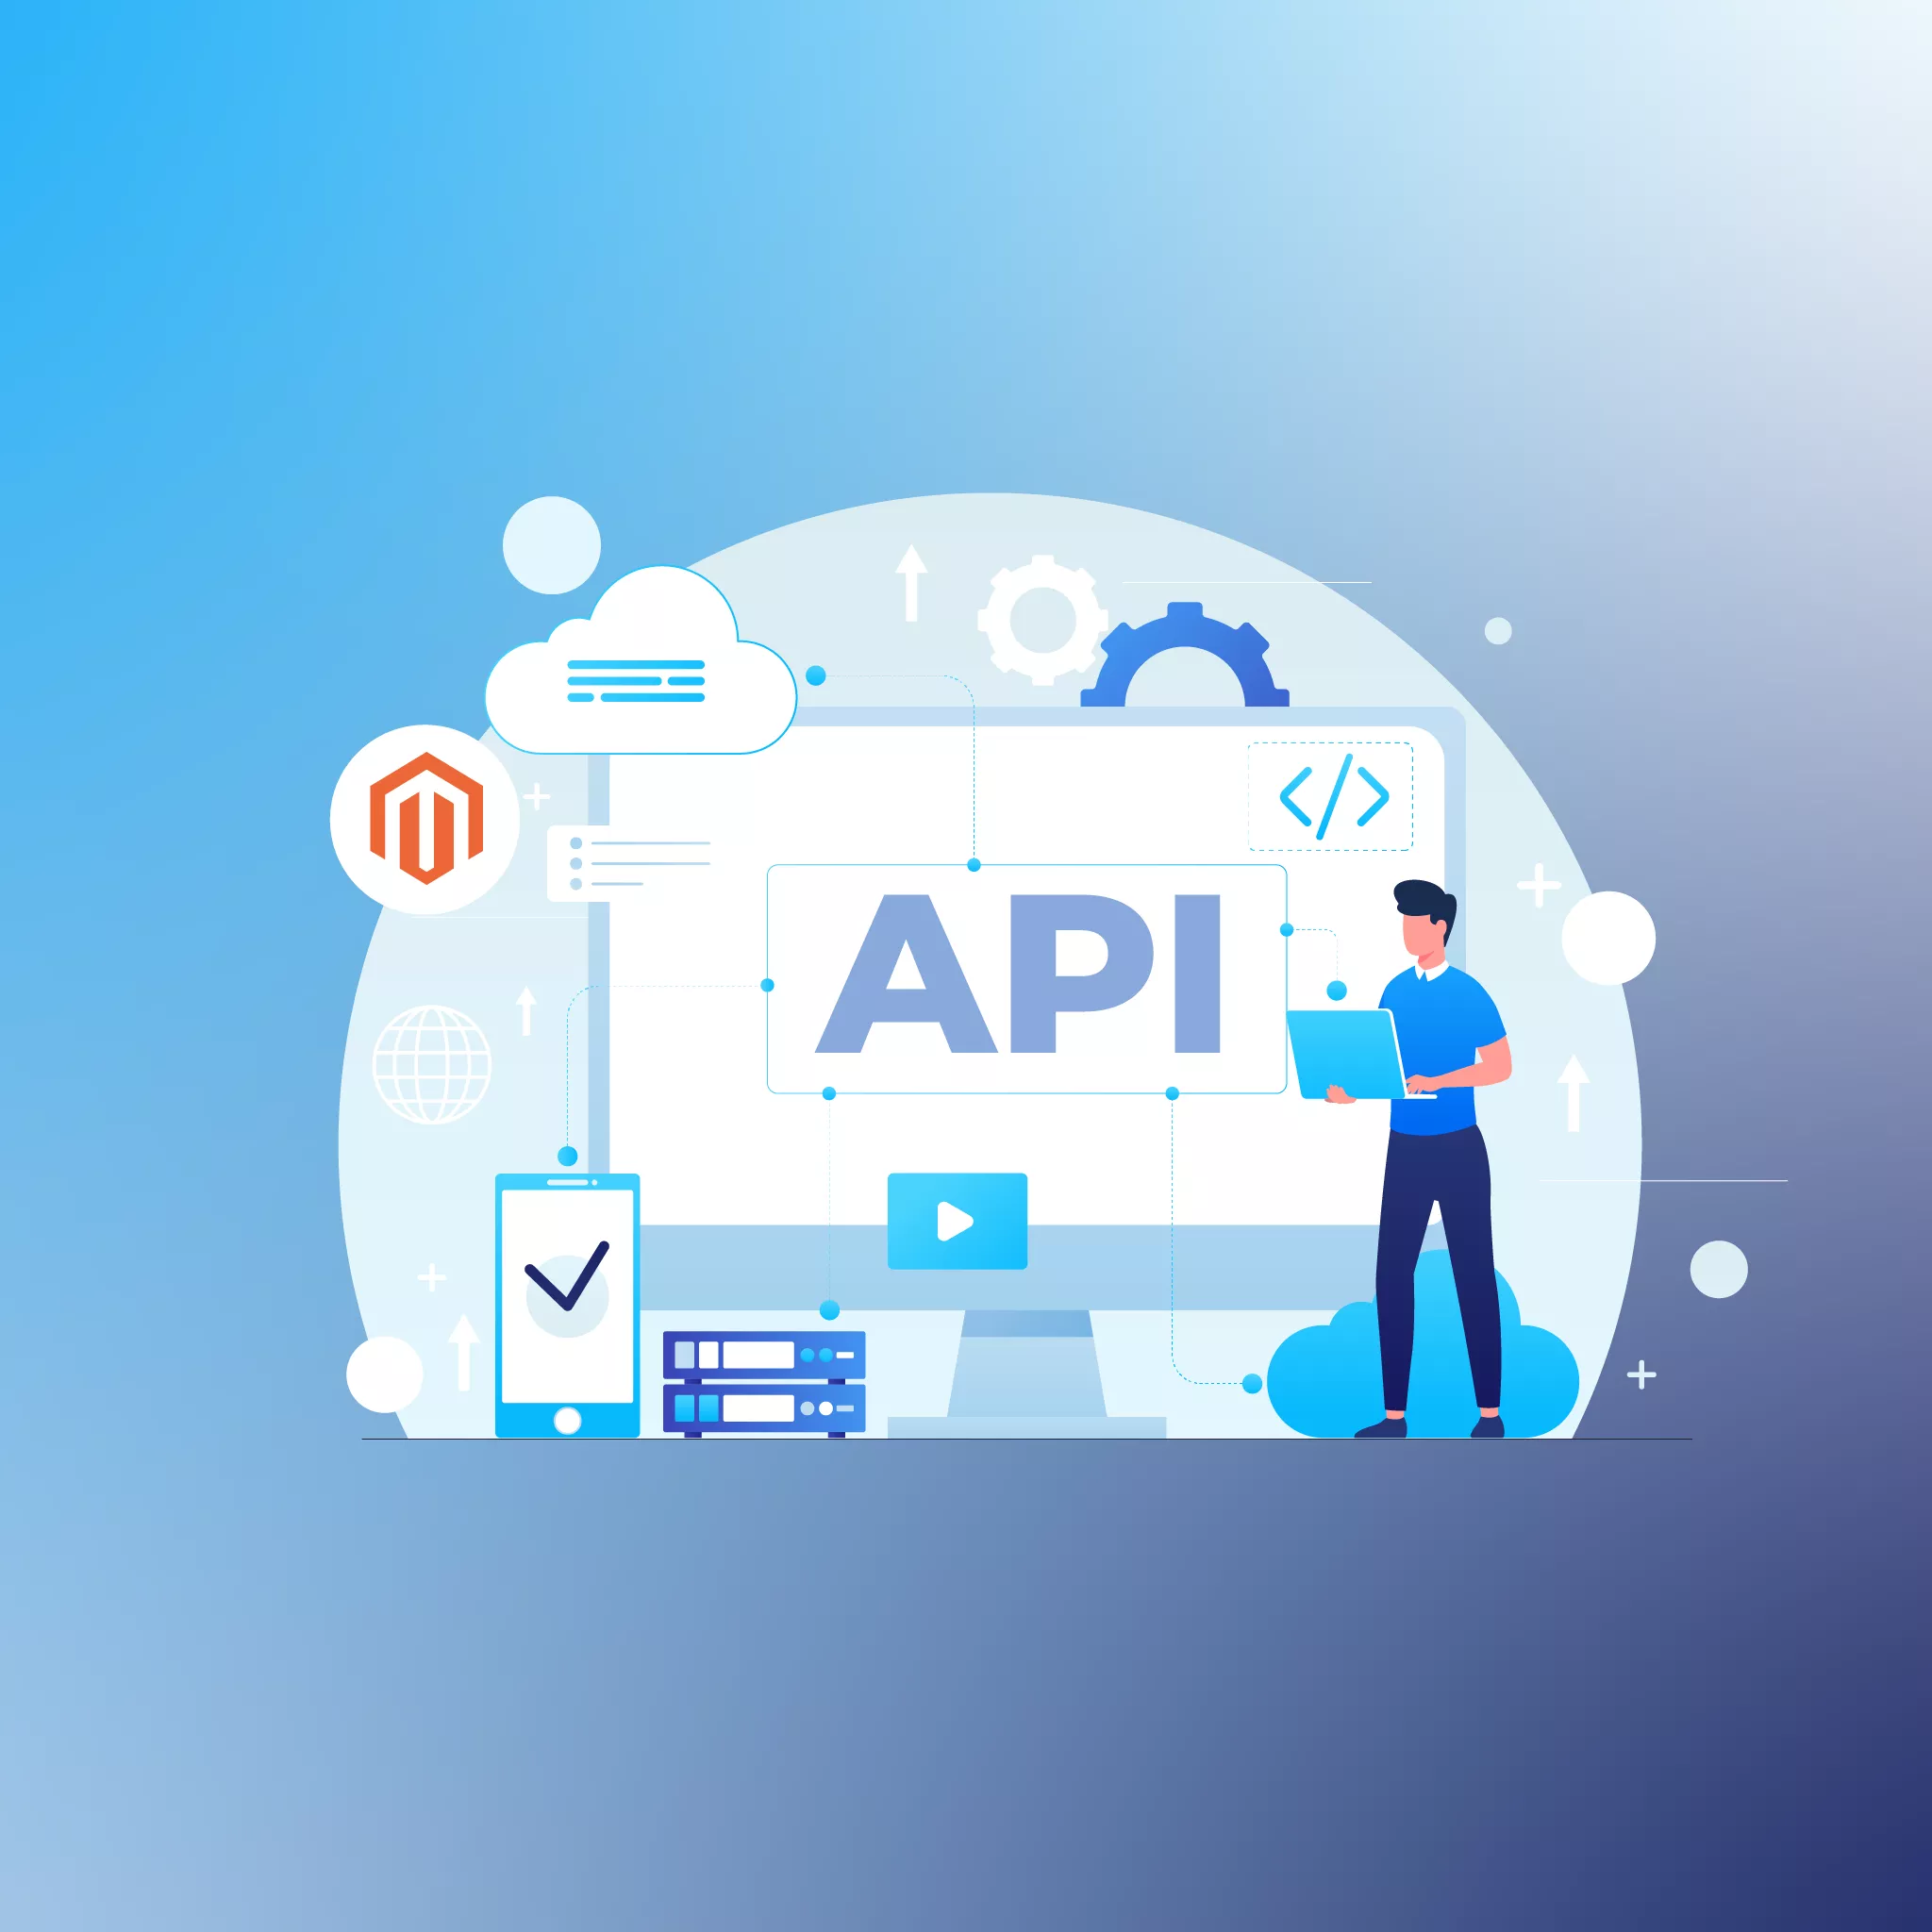 Feature image of a developer working on Magento 2 Rest API, surrounded by icons representing coding, cloud services, mobile, Magento, and server.